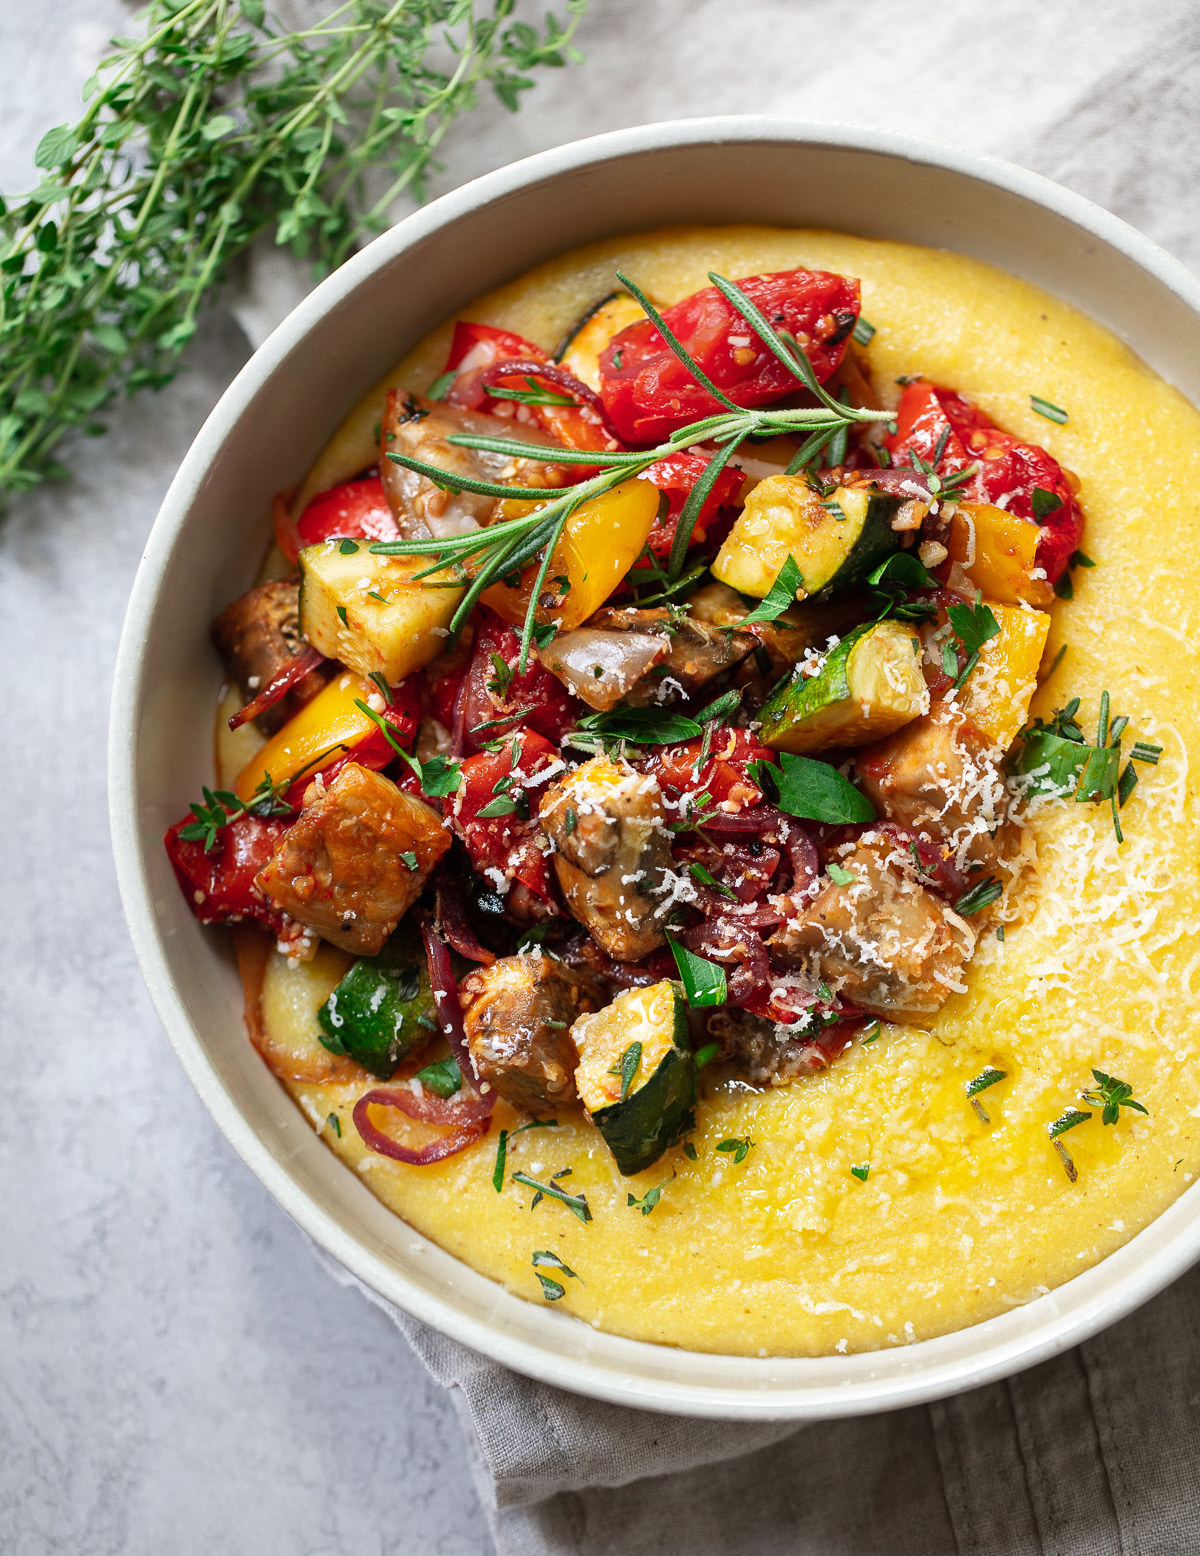 A bowl of cheesy polenta topped with diced roasted vegetables